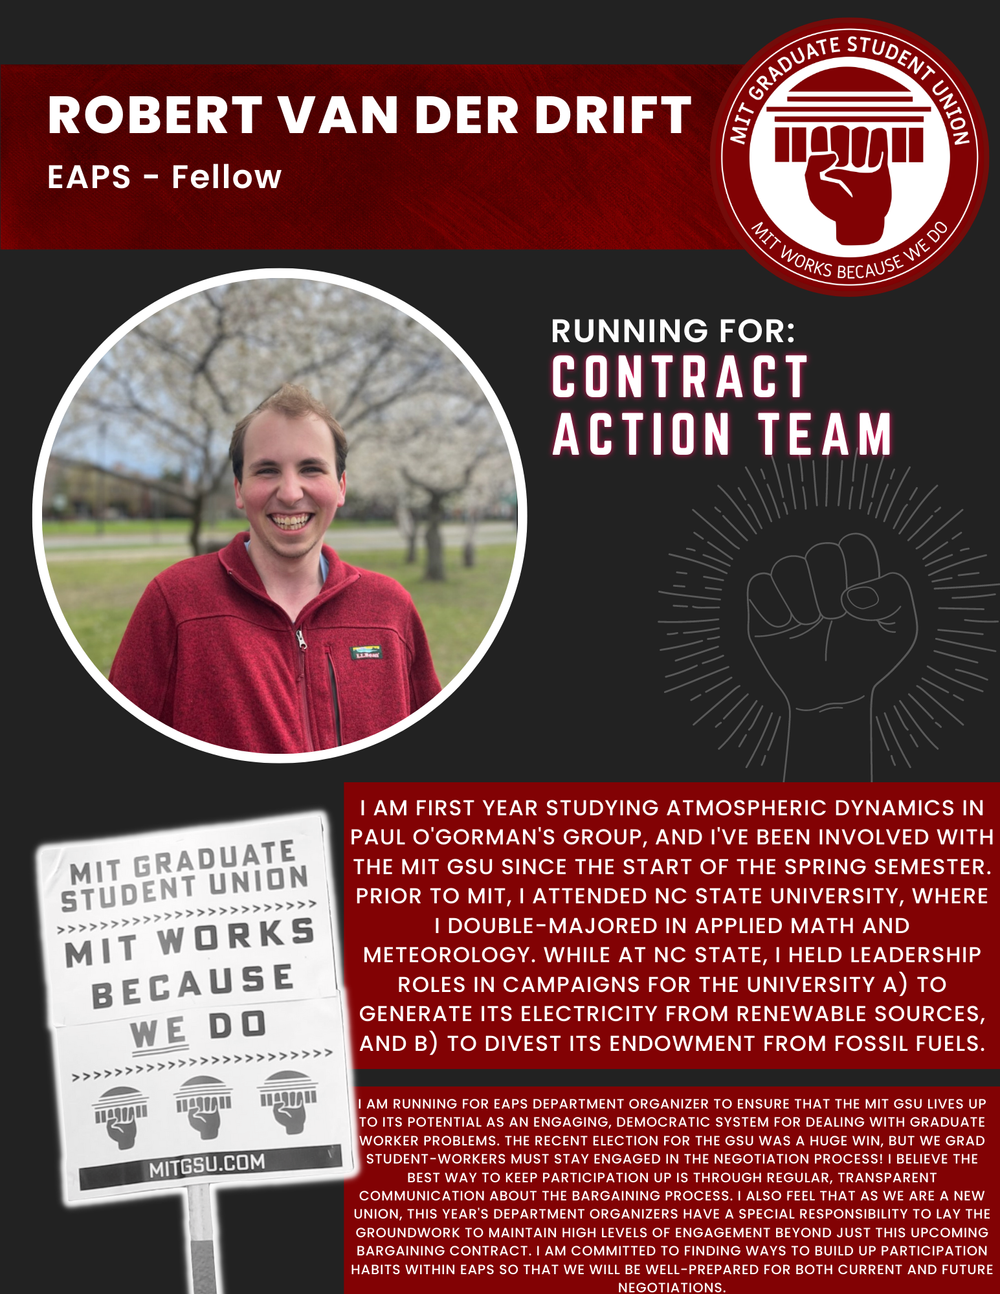  ROBERT VAN DER DRIFT EAPS - Fellow   RUNNING FOR: Contract Action Team  I AM FIRST YEAR STUDYING ATMOSPHERIC DYNAMICS IN PAUL O'GORMAN'S GROUP, AND I'VE BEEN INVOLVED WITH THE MIT GSU SINCE THE START OF THE SPRING SEMESTER.  PRIOR TO MIT, I ATTENDED